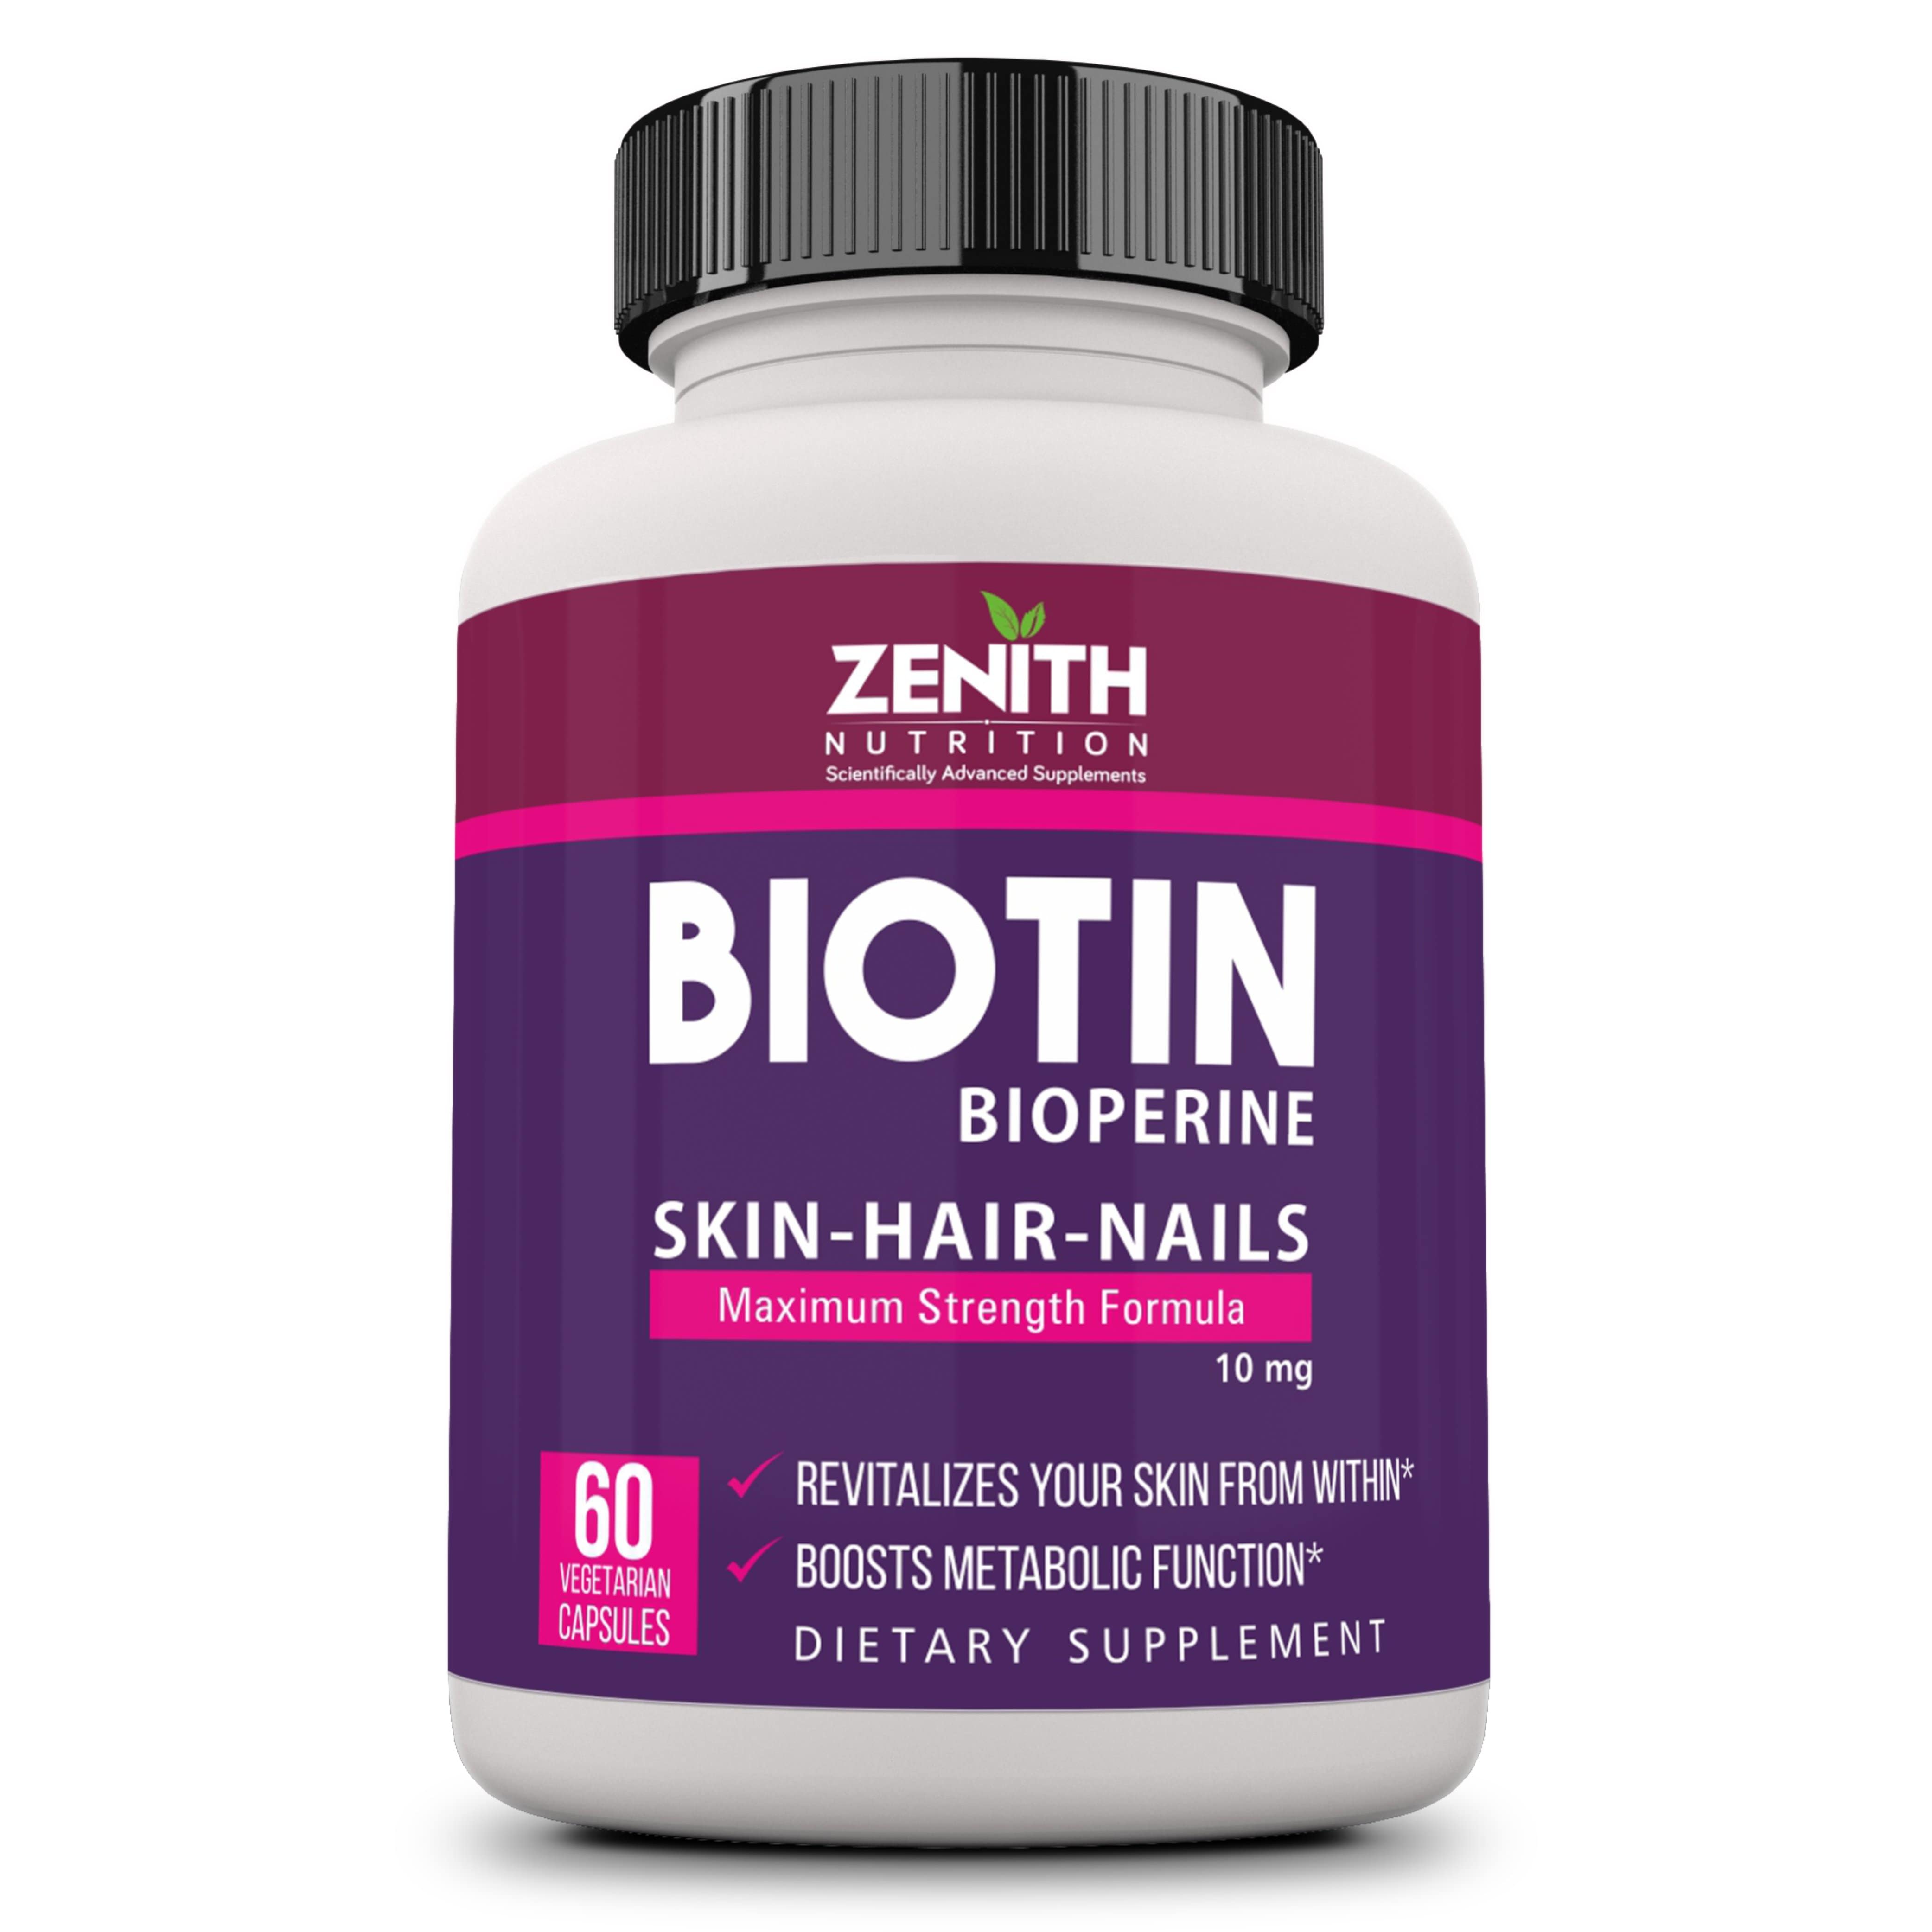 Which is the best multivitamin capsule or biotin capsule for hair growth  available in India  Quora